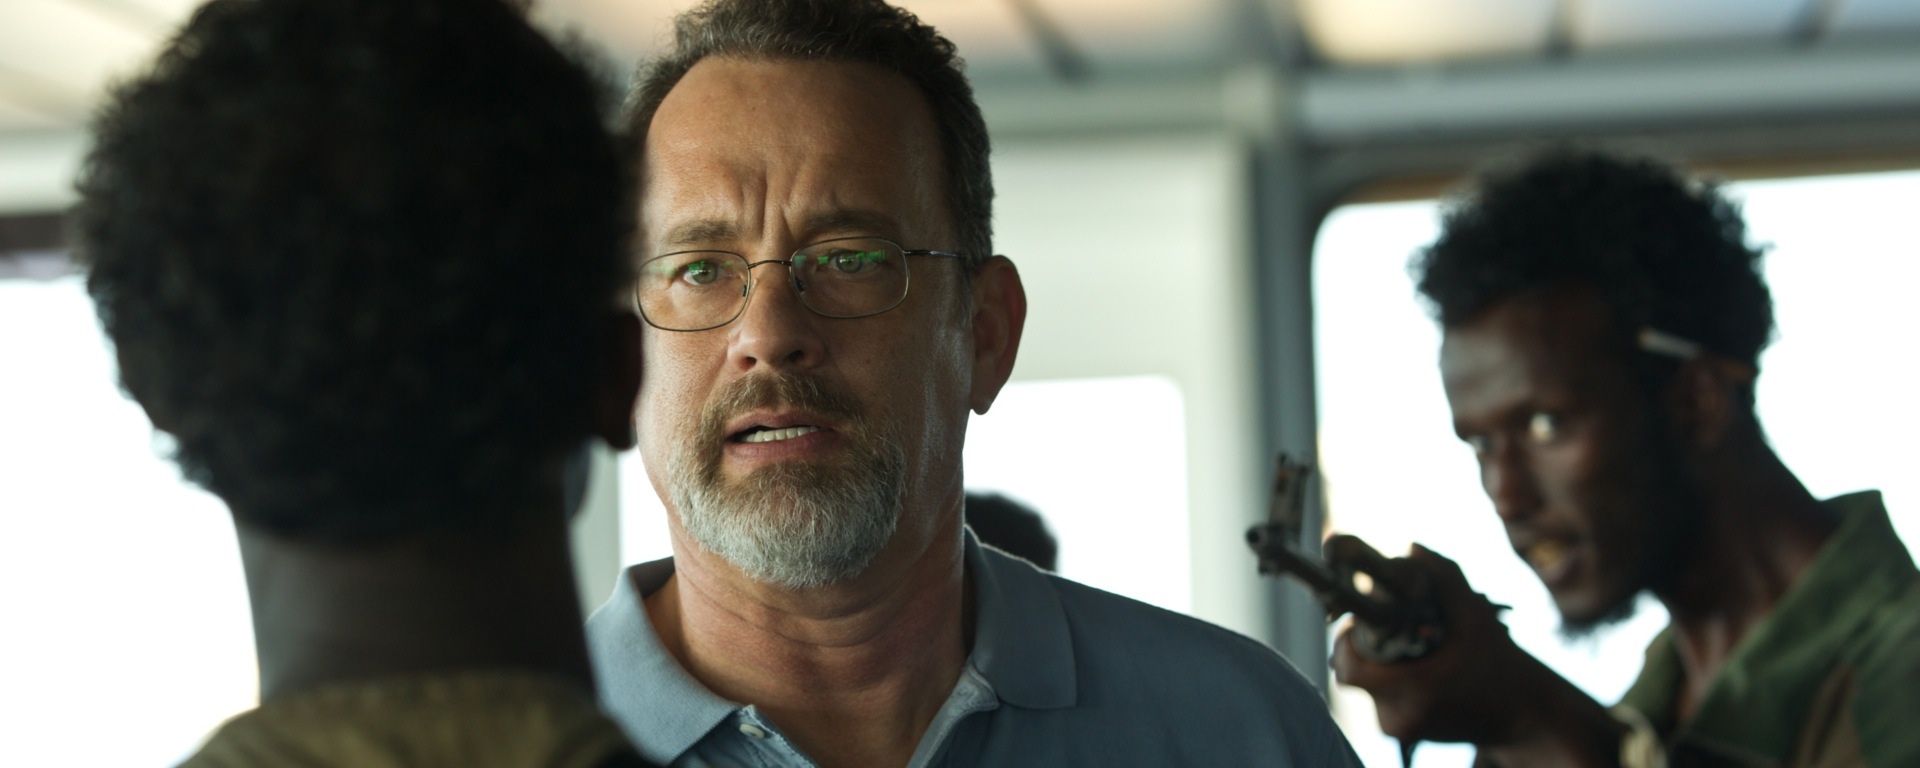 Captain Phillips Blu-ray SteelBook is Releasing as an Exclusive from Best Buy USA